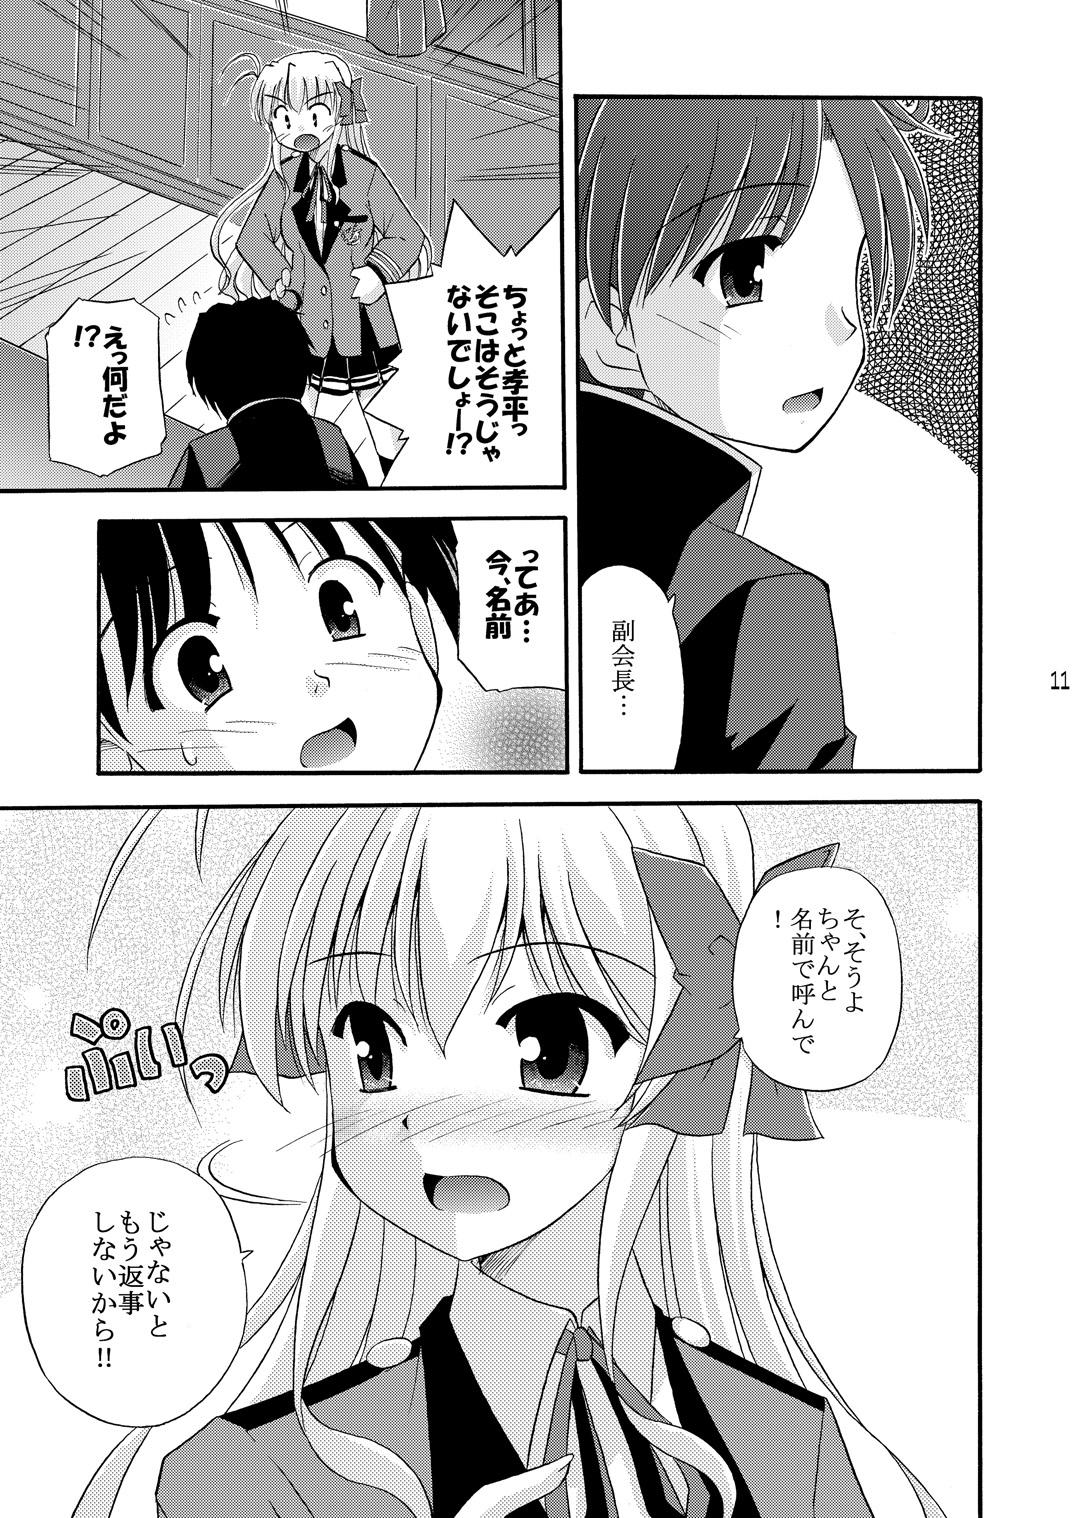 Hot Mom lose no time - Fortune arterial Toying - Page 12